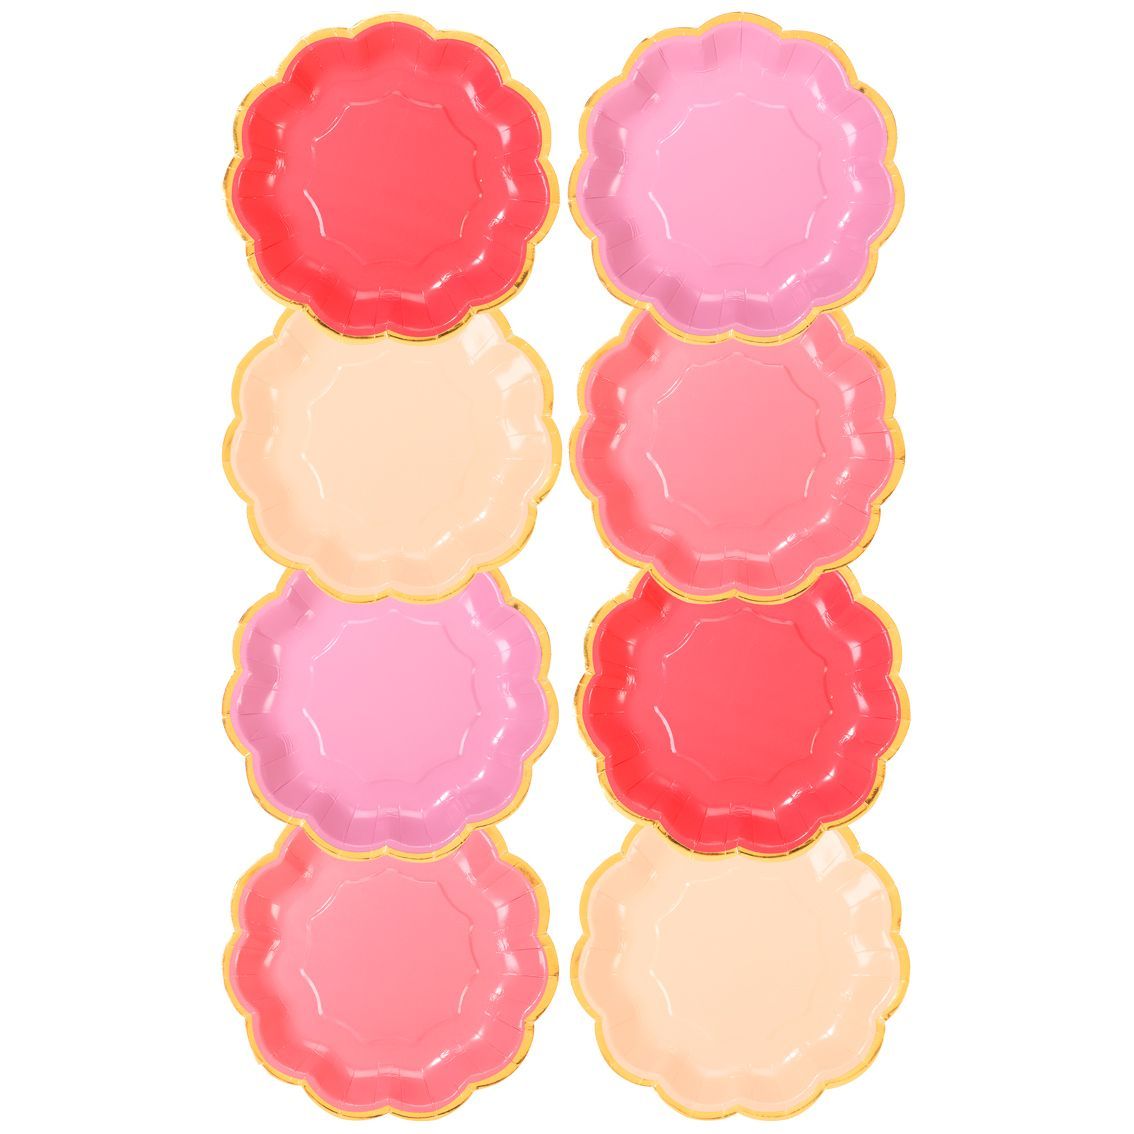 Assorted Blush & Pink Scalloped Dessert Plates 8ct | The Party Darling